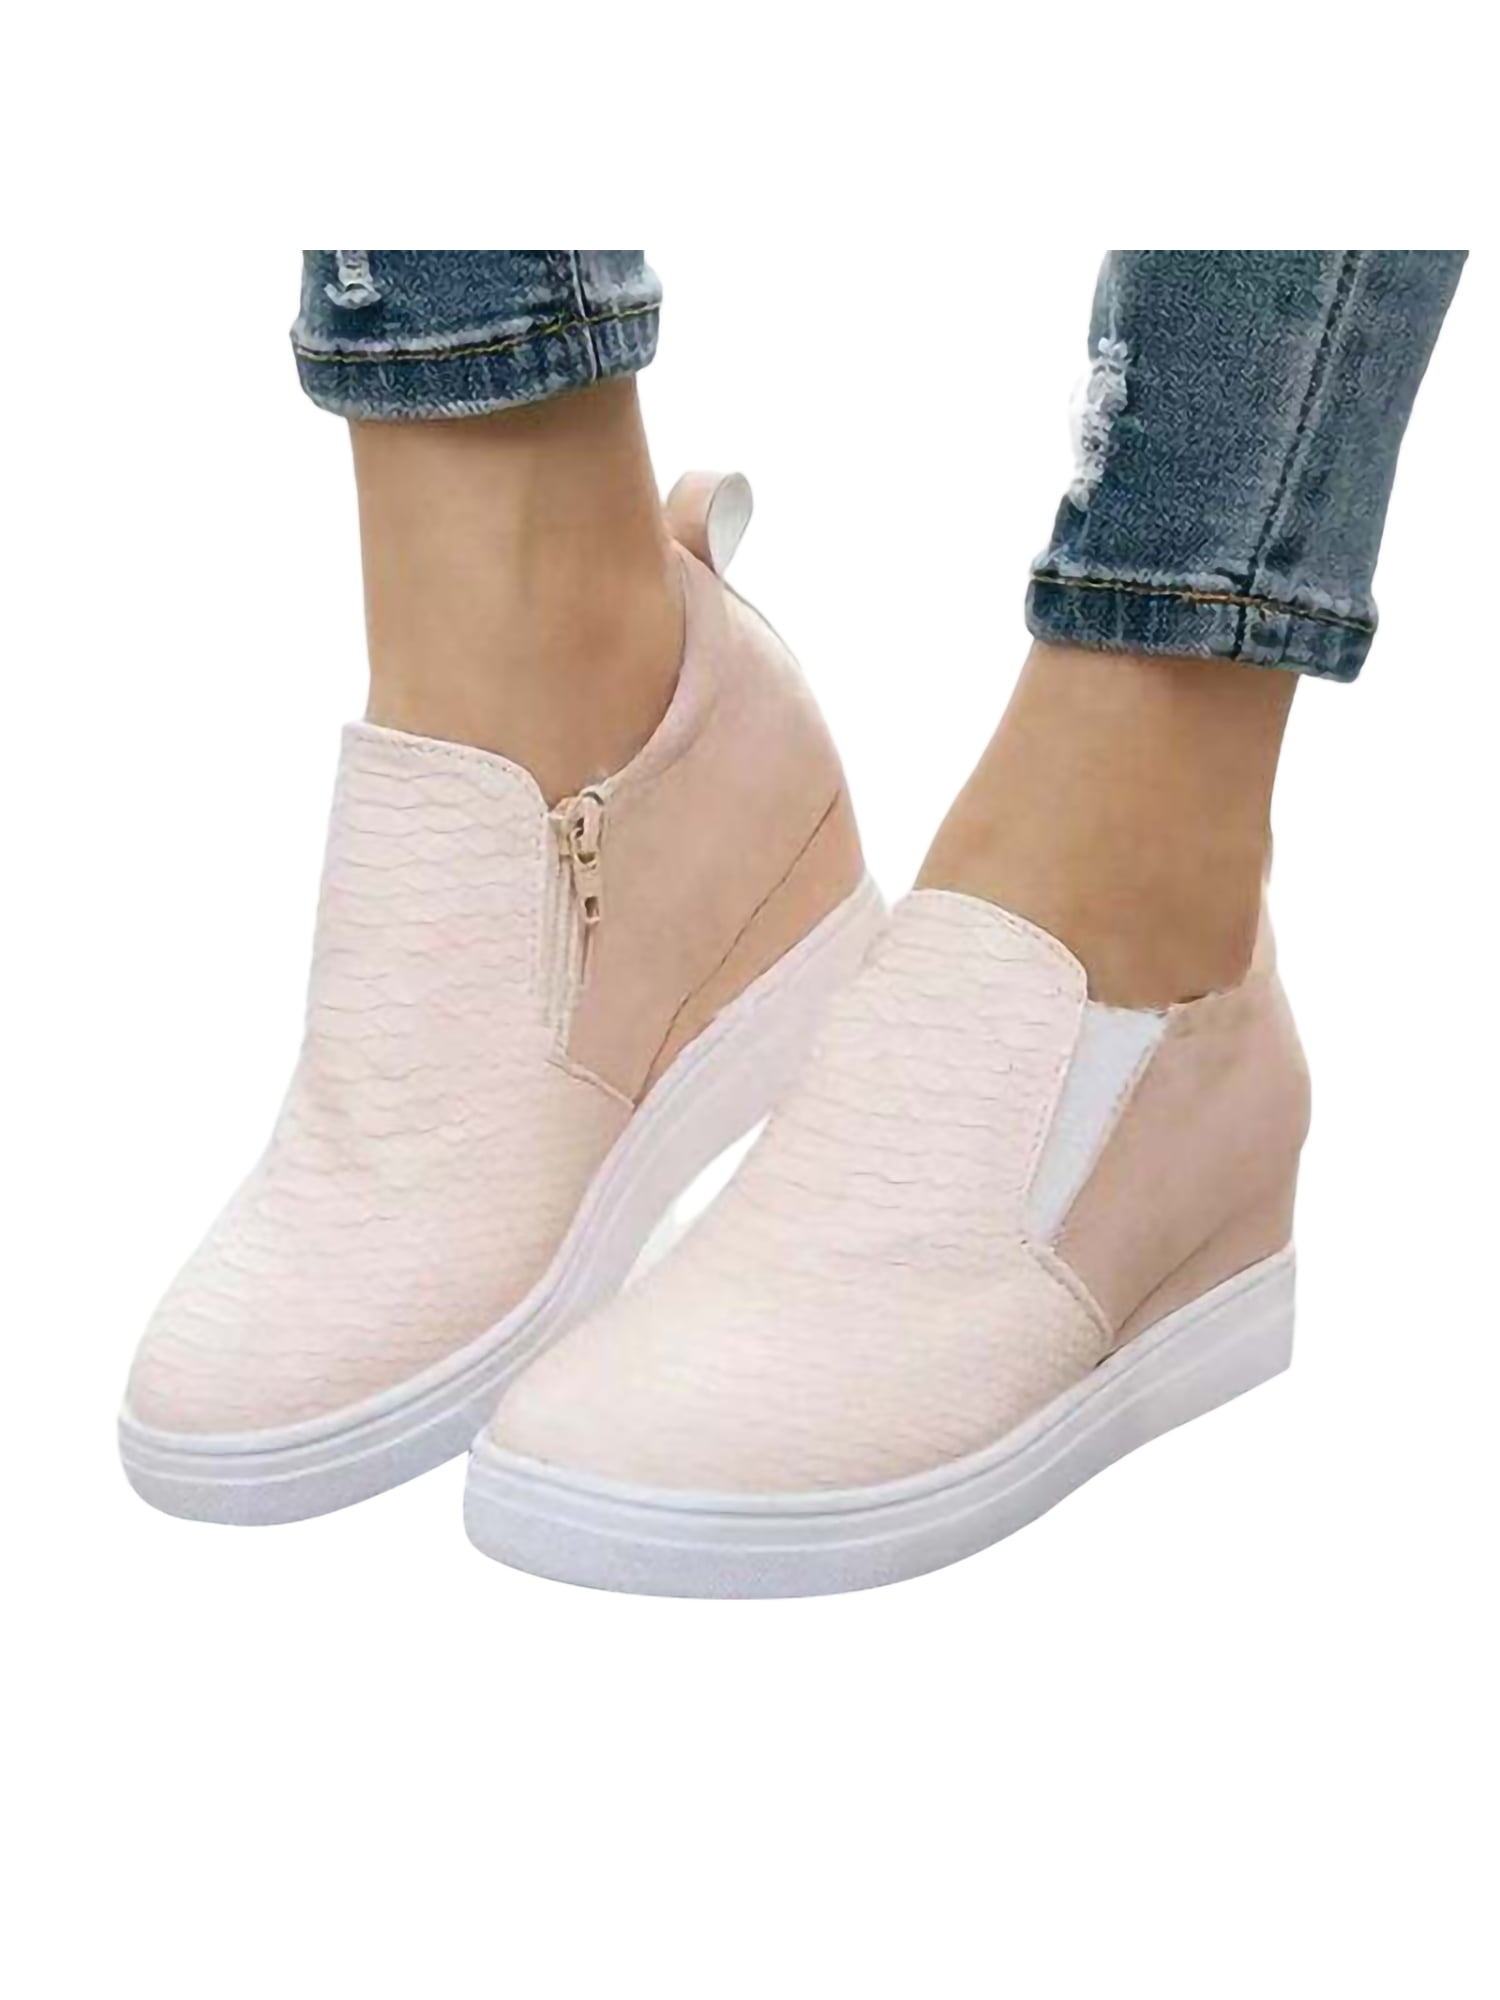 Womens Lace Up Shoes Sport Sneakers Wedge Hidden Heel Platform Creepers Casual 